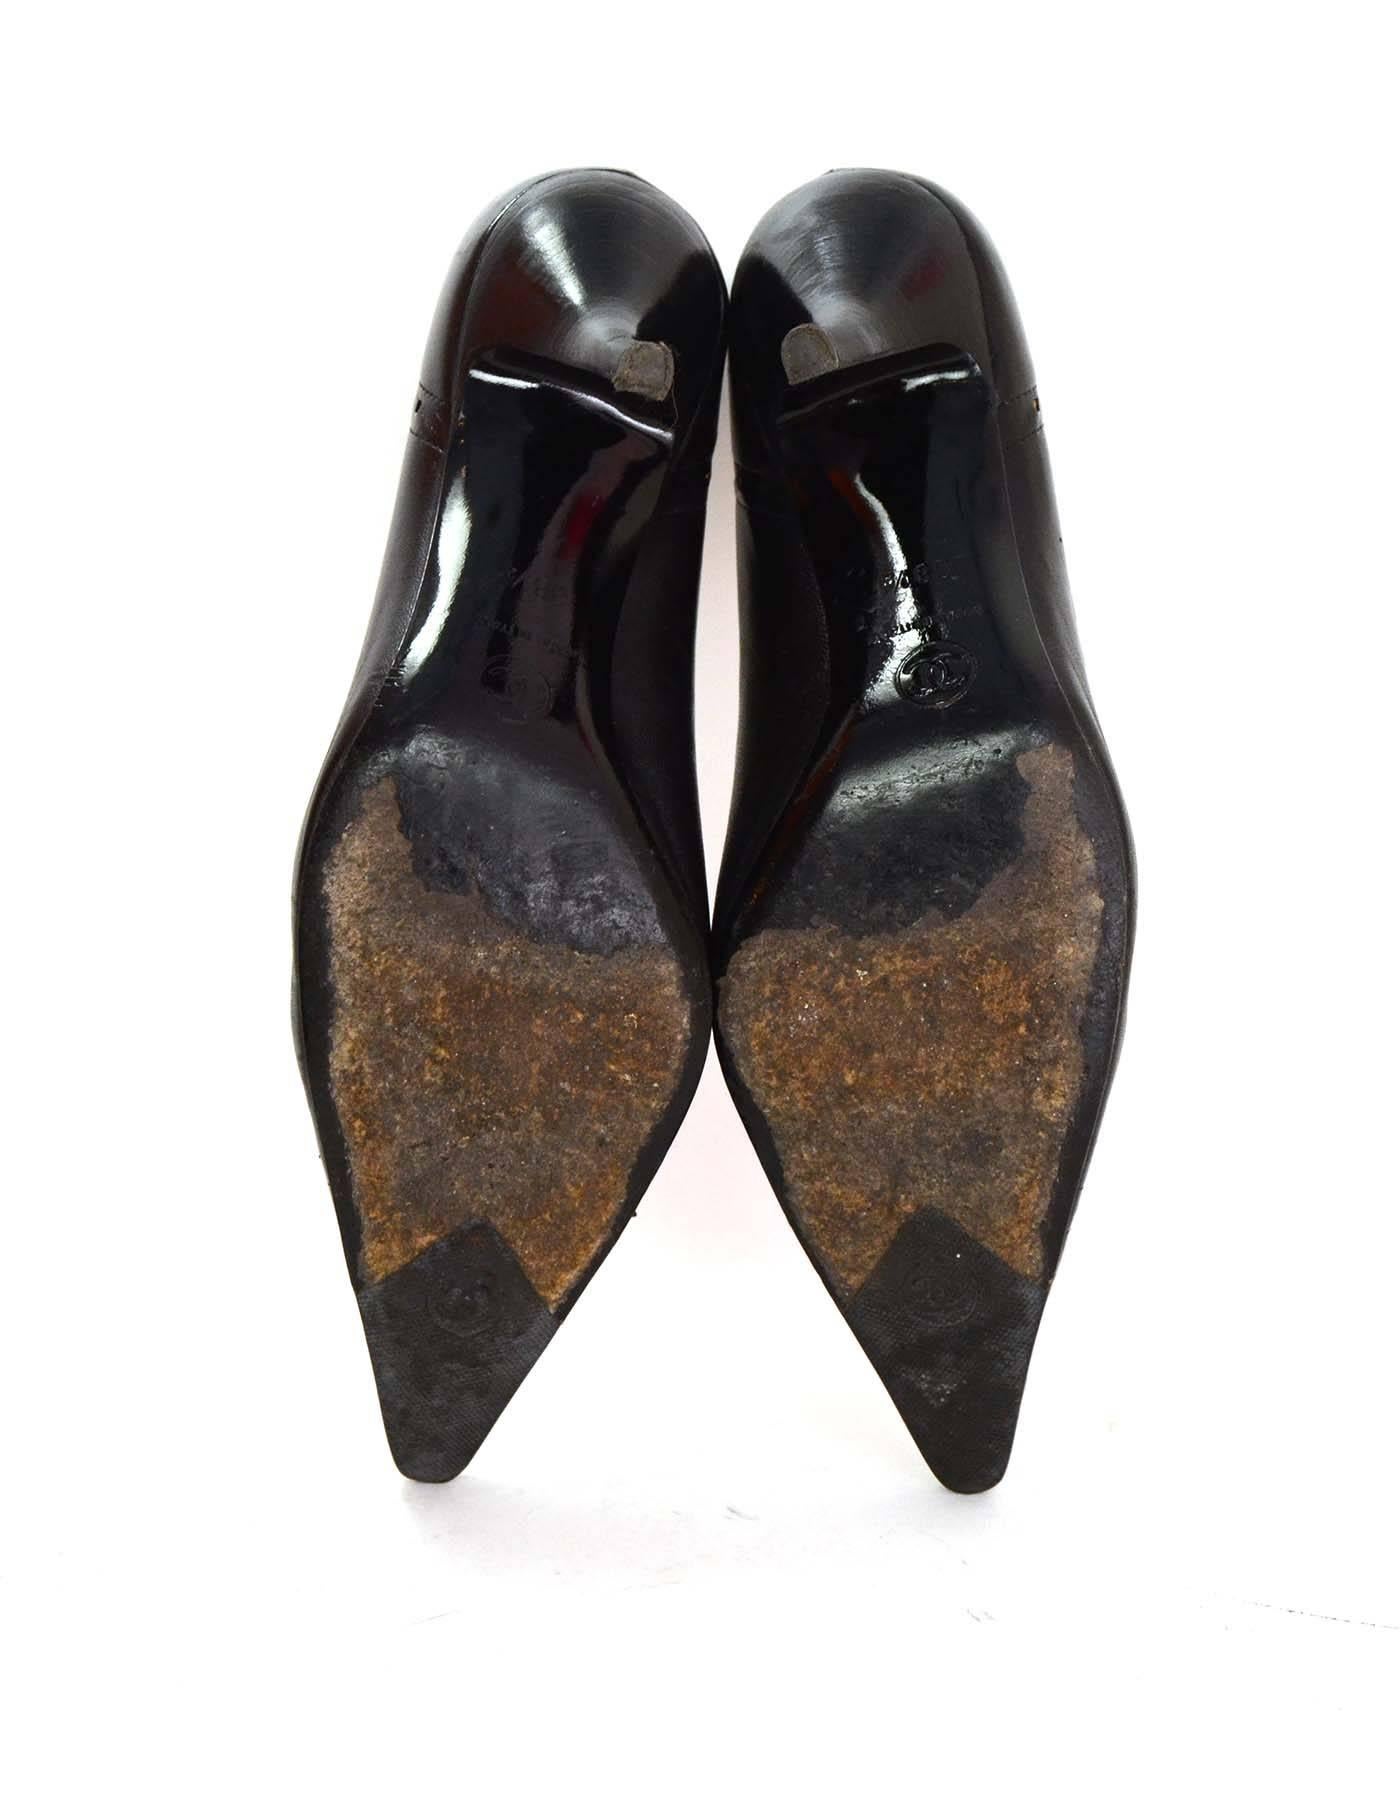 Chanel Perforated Black Pointed Toe Pumps Sz 38.5 3